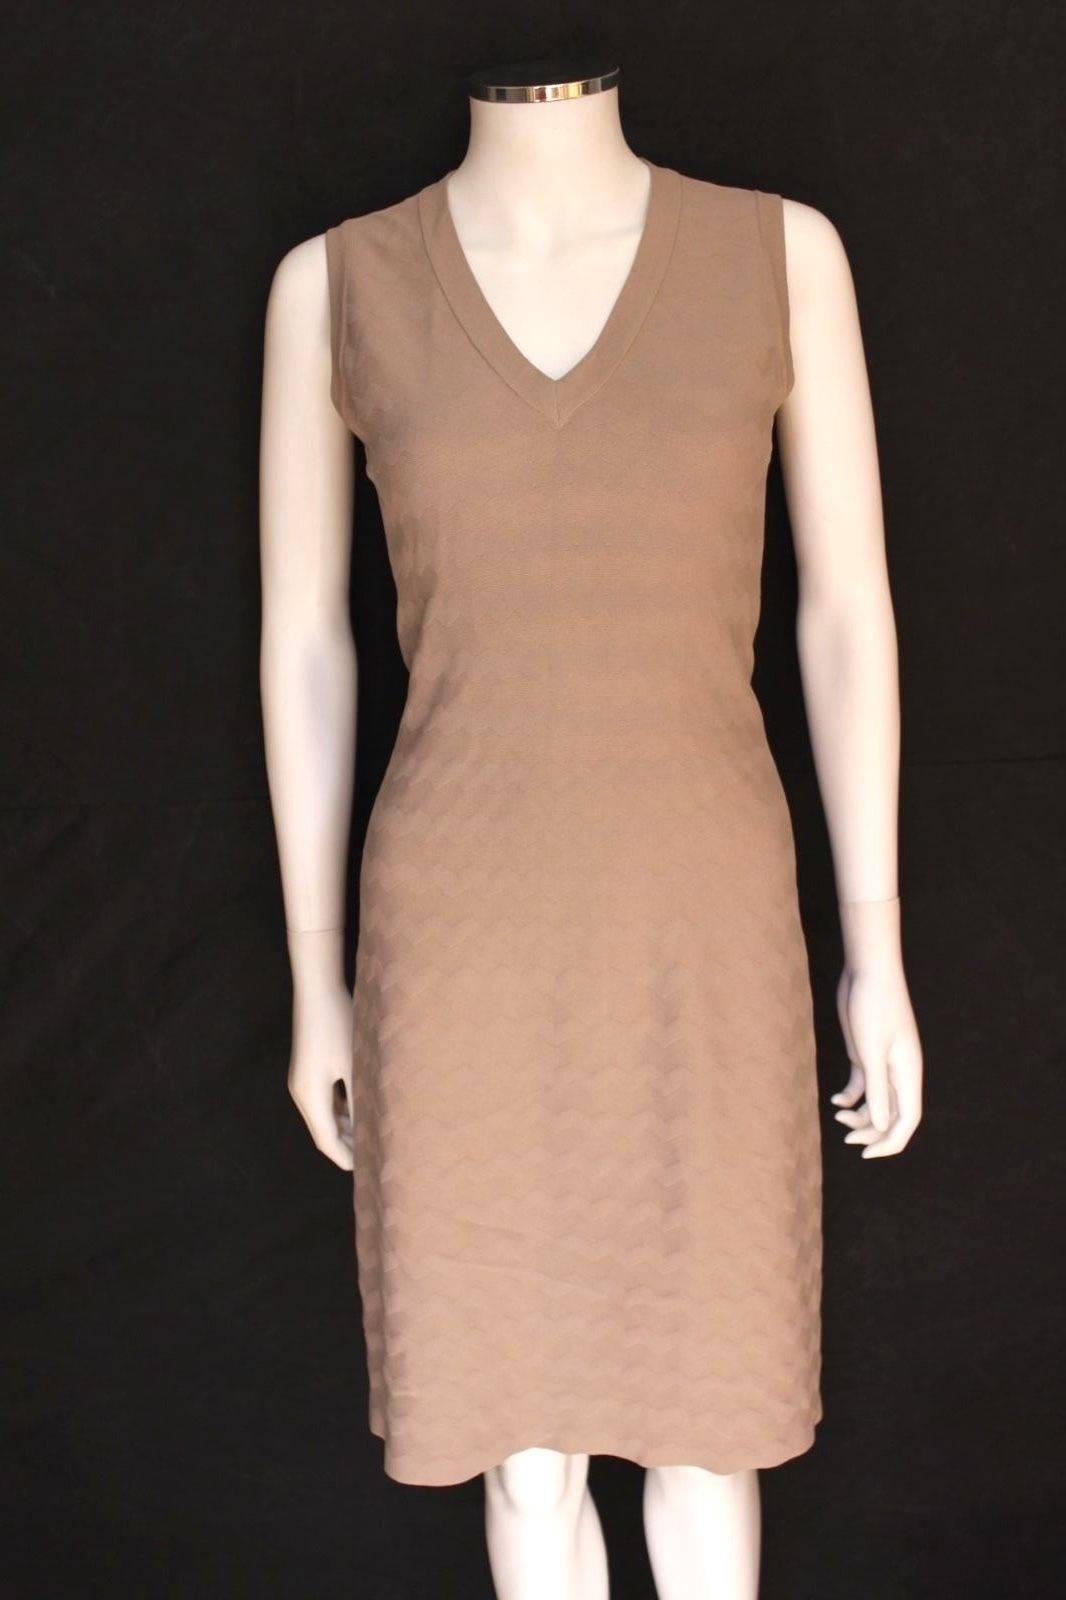 Alaia Dusky Beige Chevron Stretch Knit Dress with Matching Top  F42 uk 12  In Excellent Condition For Sale In London, GB